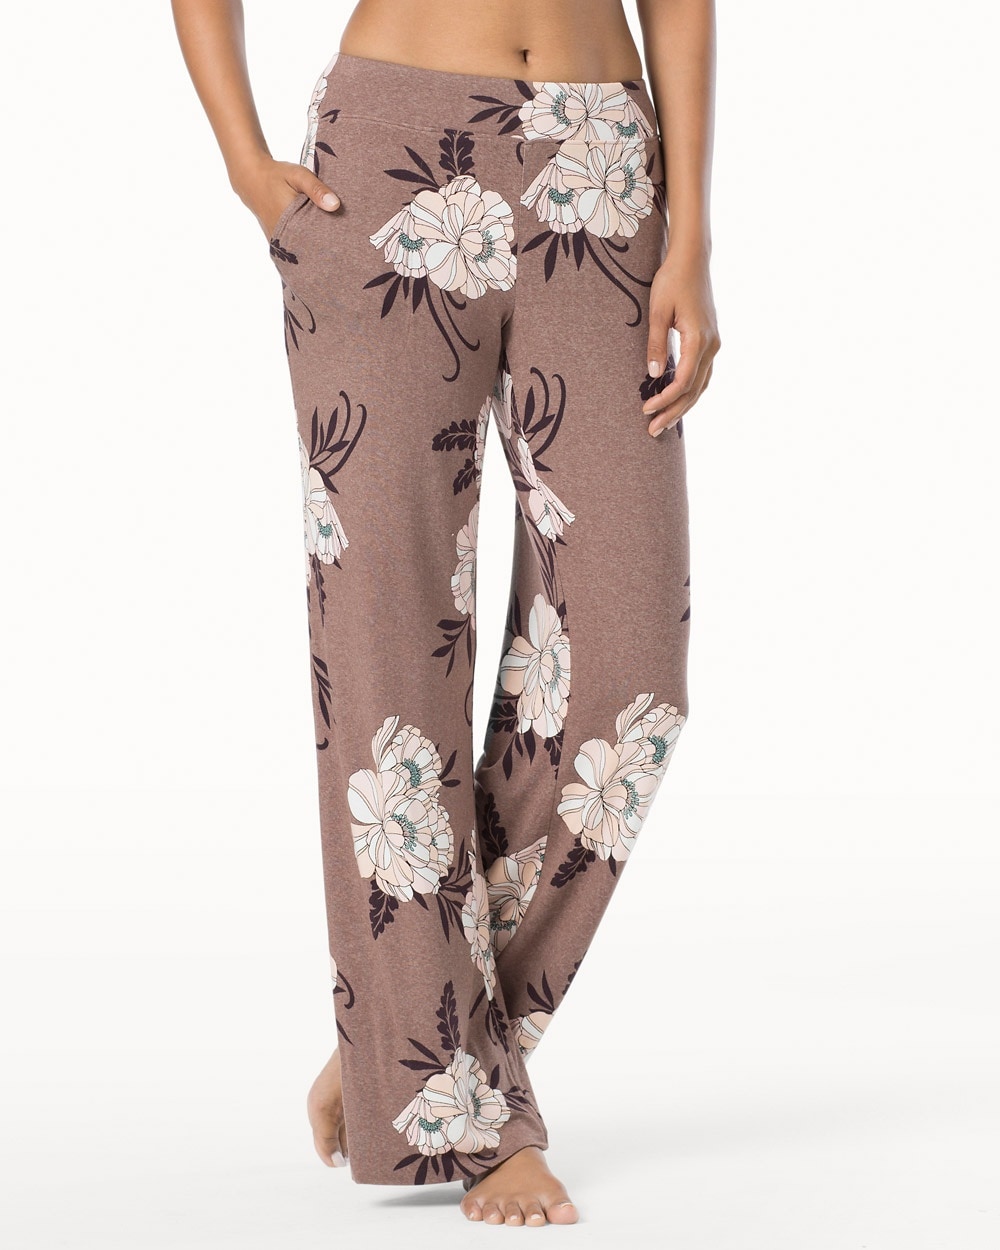 Embraceable Cool Nights Tall Inseam Pajama Pants Graphic Foliage